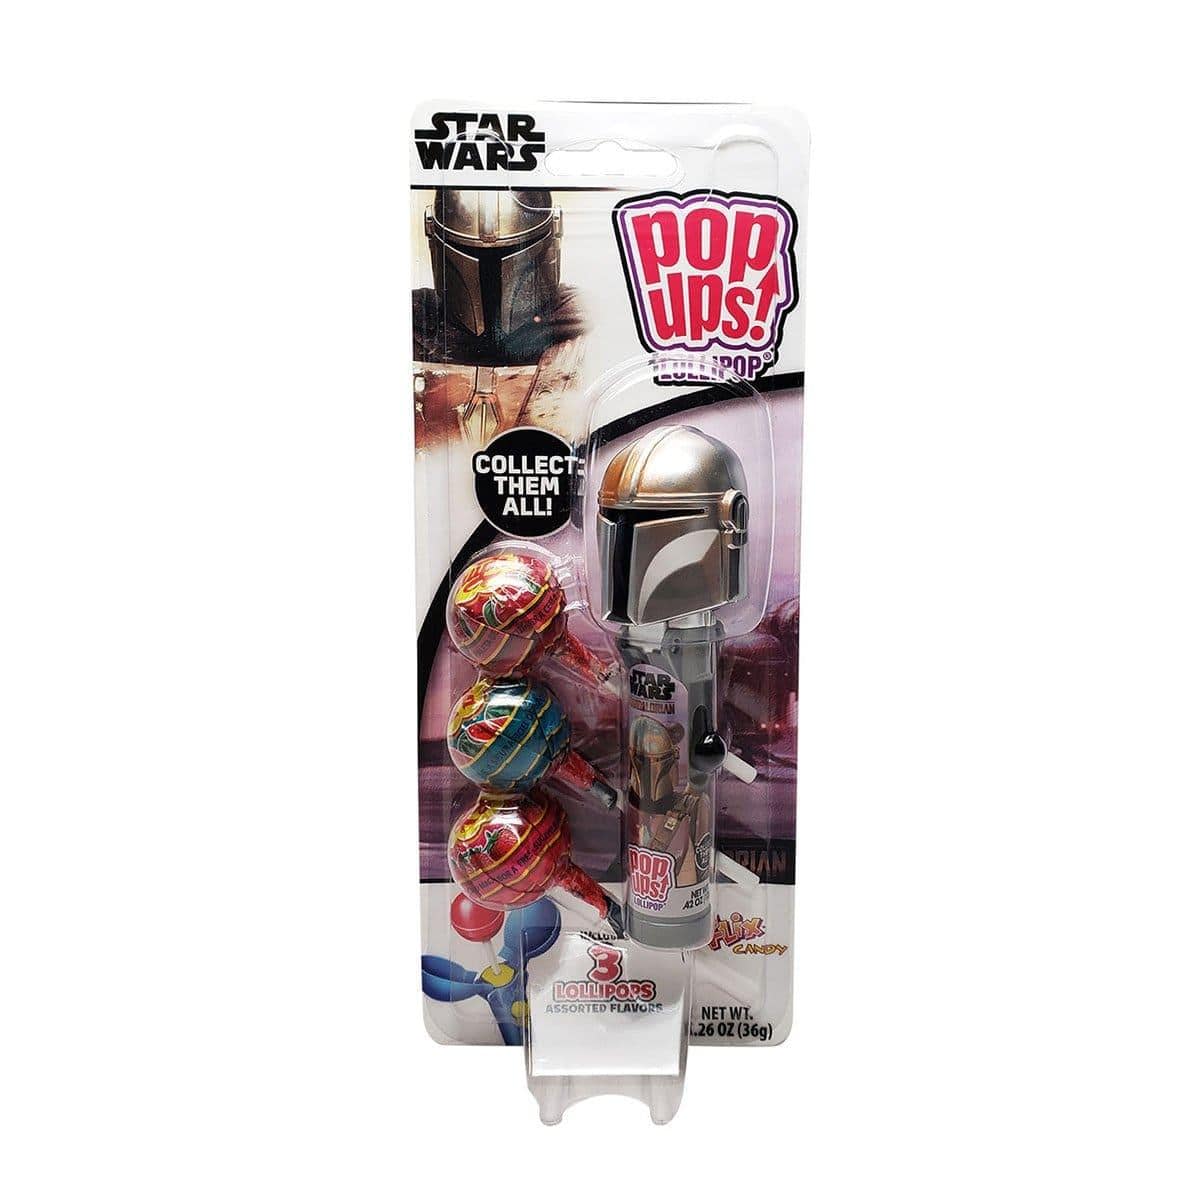 Buy Candy Mandalorian - Pop Ups Blister, Assortment, 1 Count sold at Party Expert